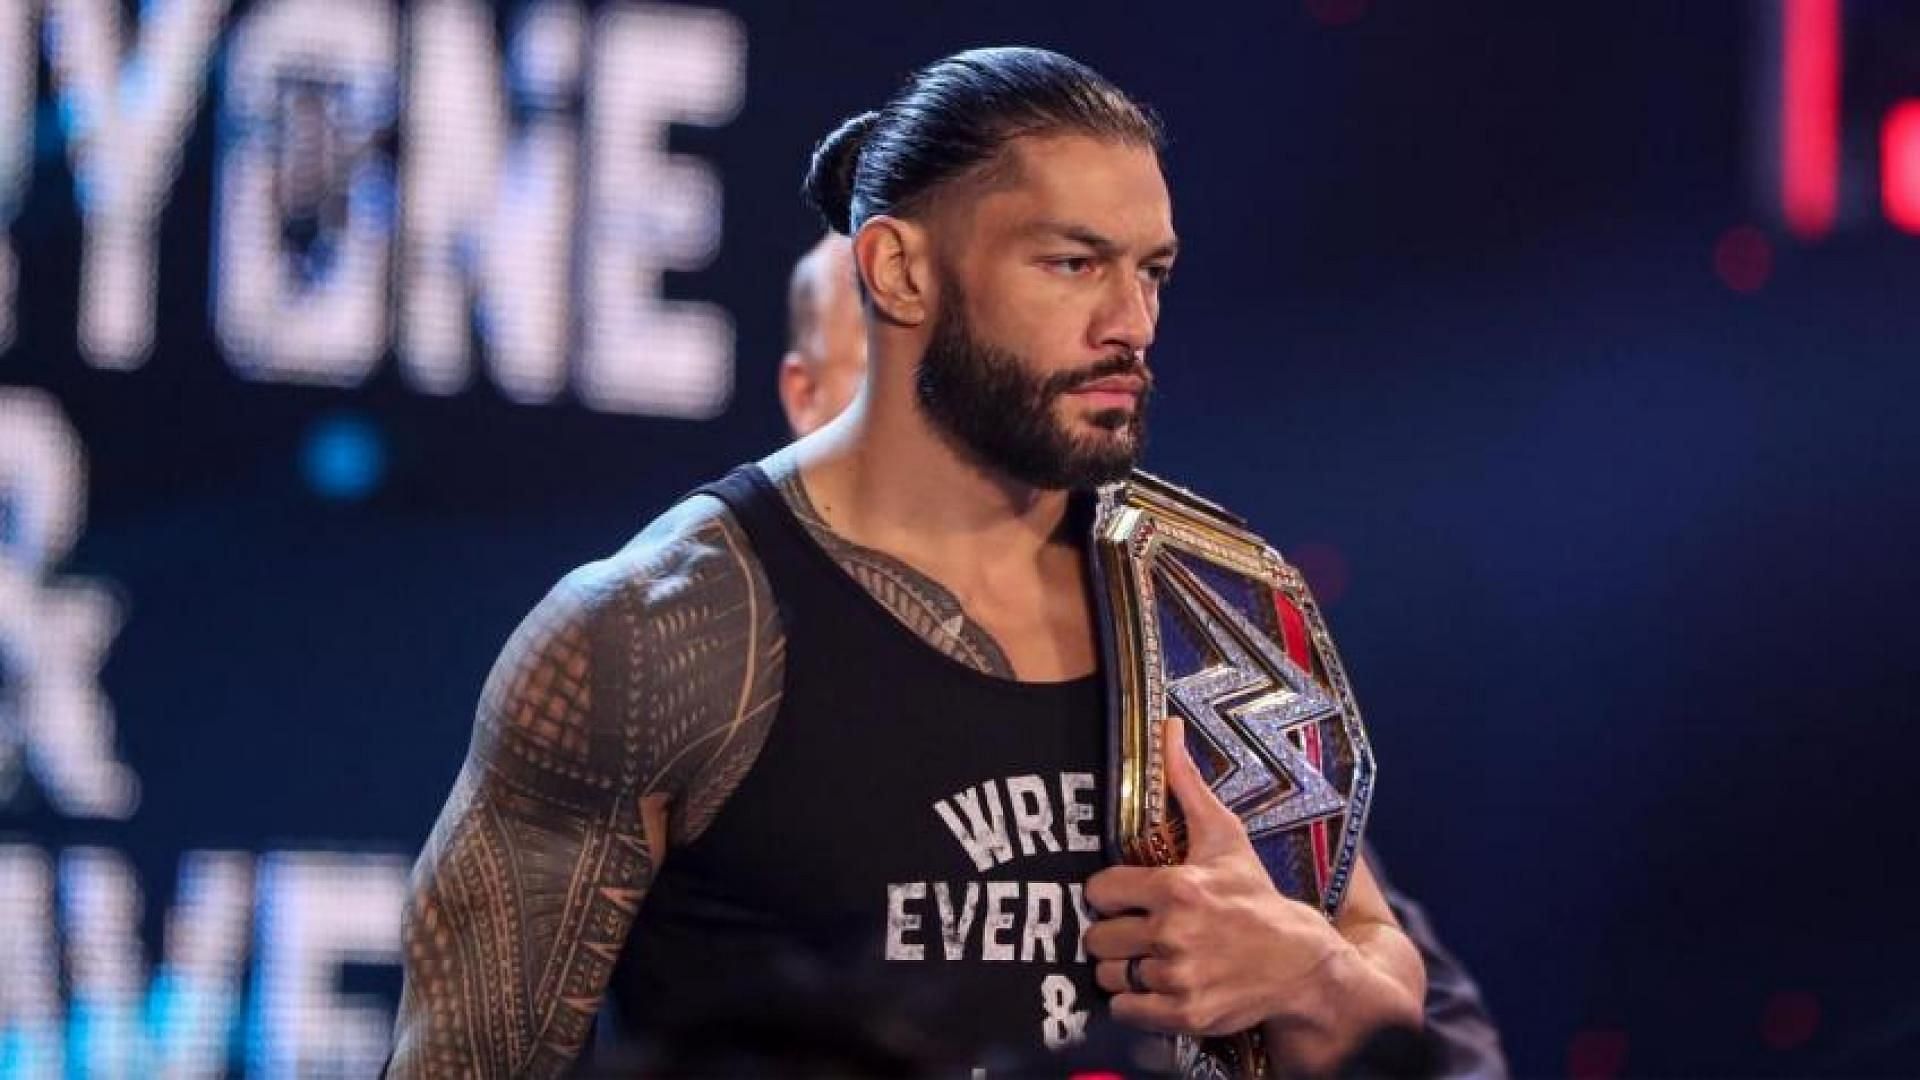 Roman Reigns headlined the live event in Charlottesville, Virginia